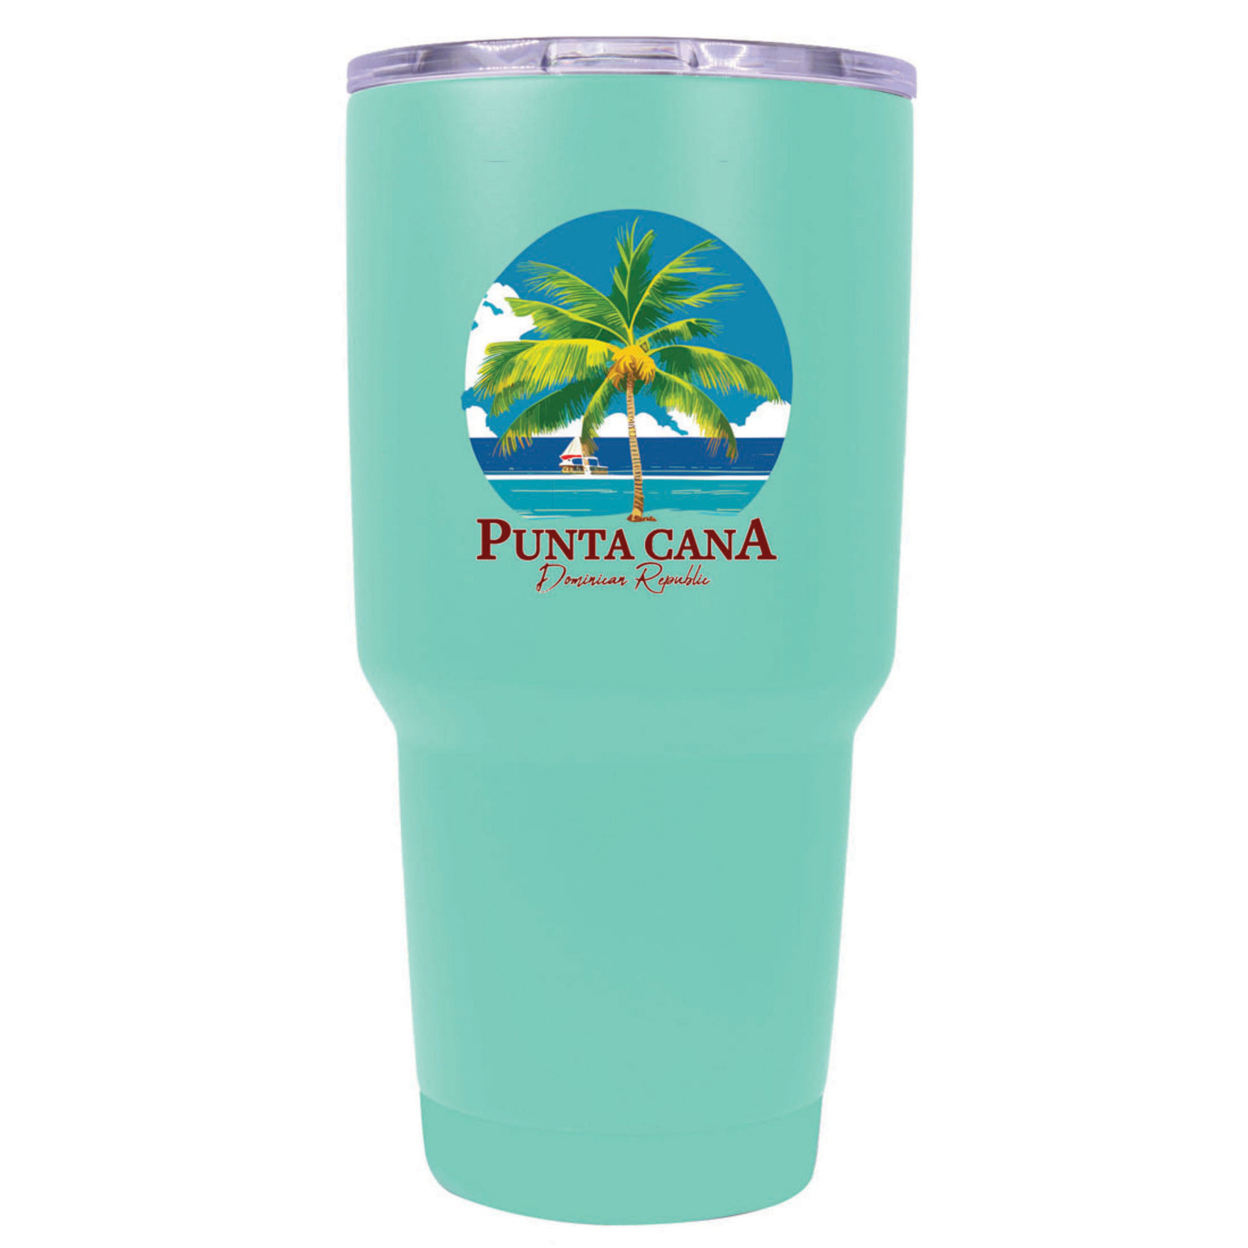 Punta Cana Dominican Republic Souvenir 24 Oz Insulated Stainless Steel Tumbler - Coral, PALM